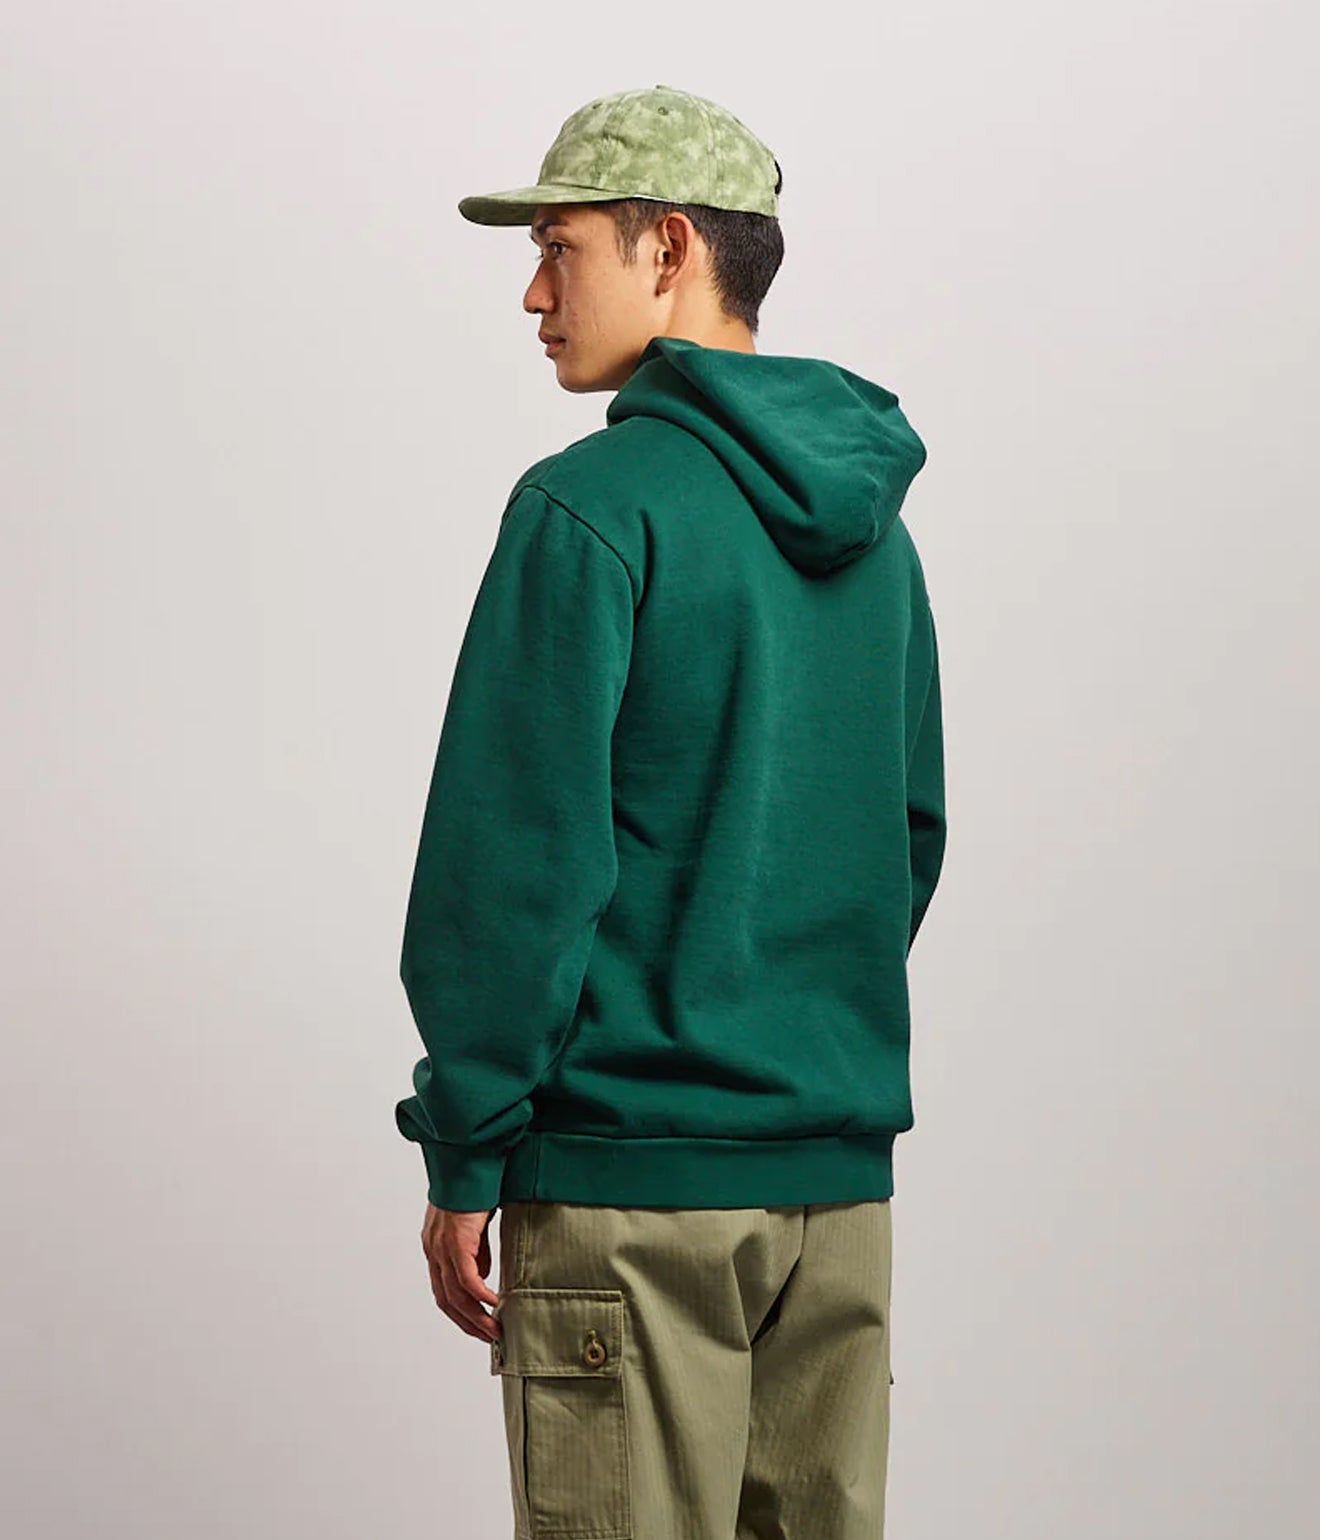 LITE YEAR "Japanese Cotton Twill 6 Panel Cap" Cloudy Washed Green - WEAREALLANIMALS